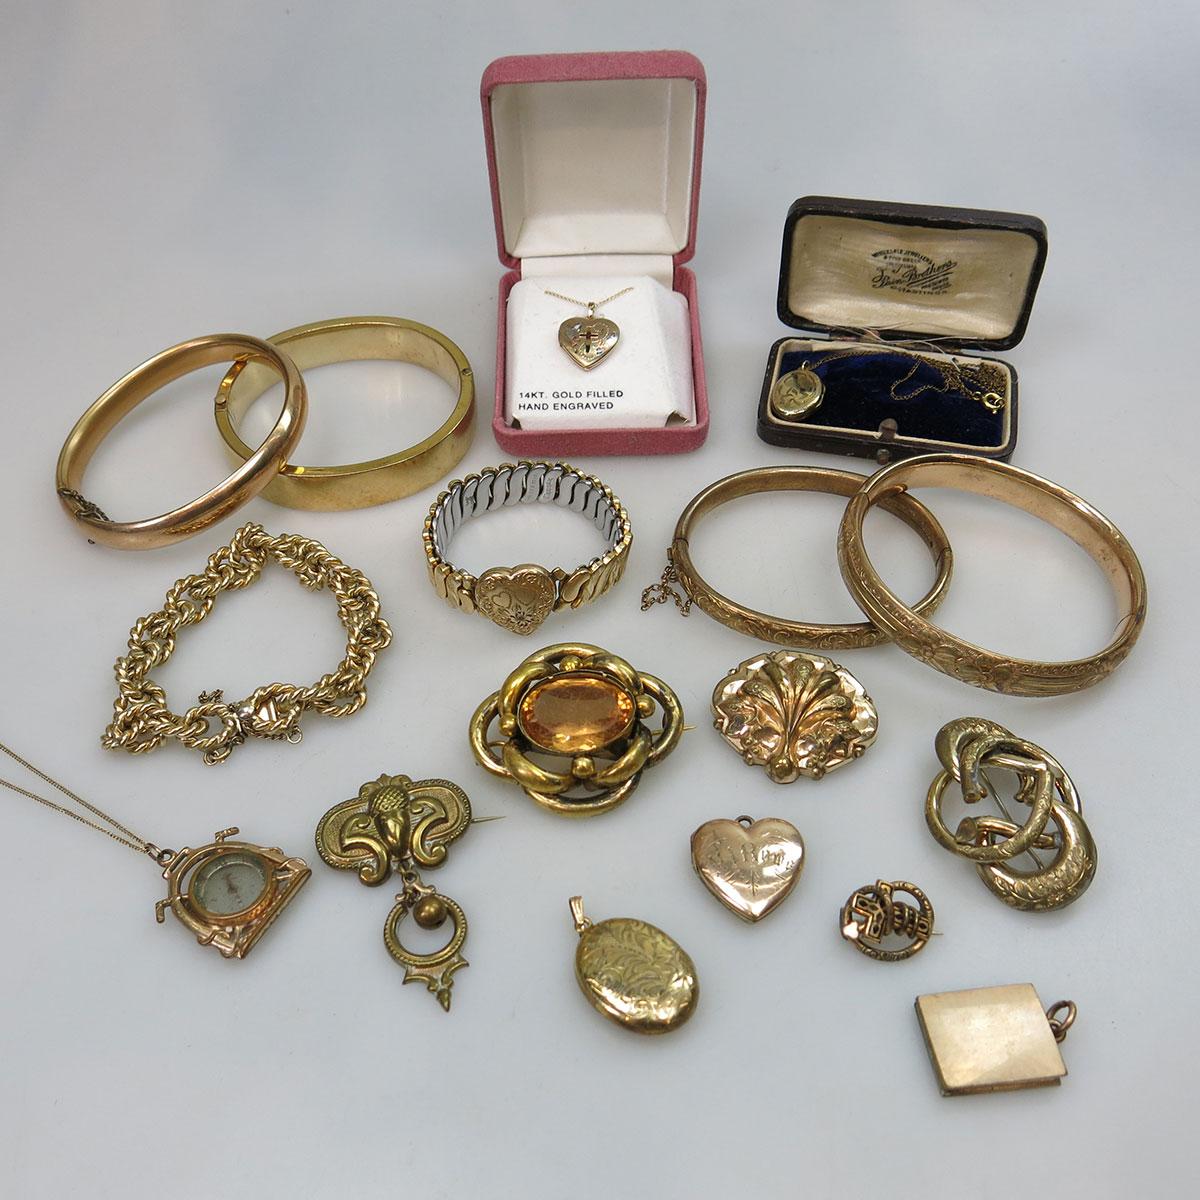 Quantity Of Gold-Filled Jewellery